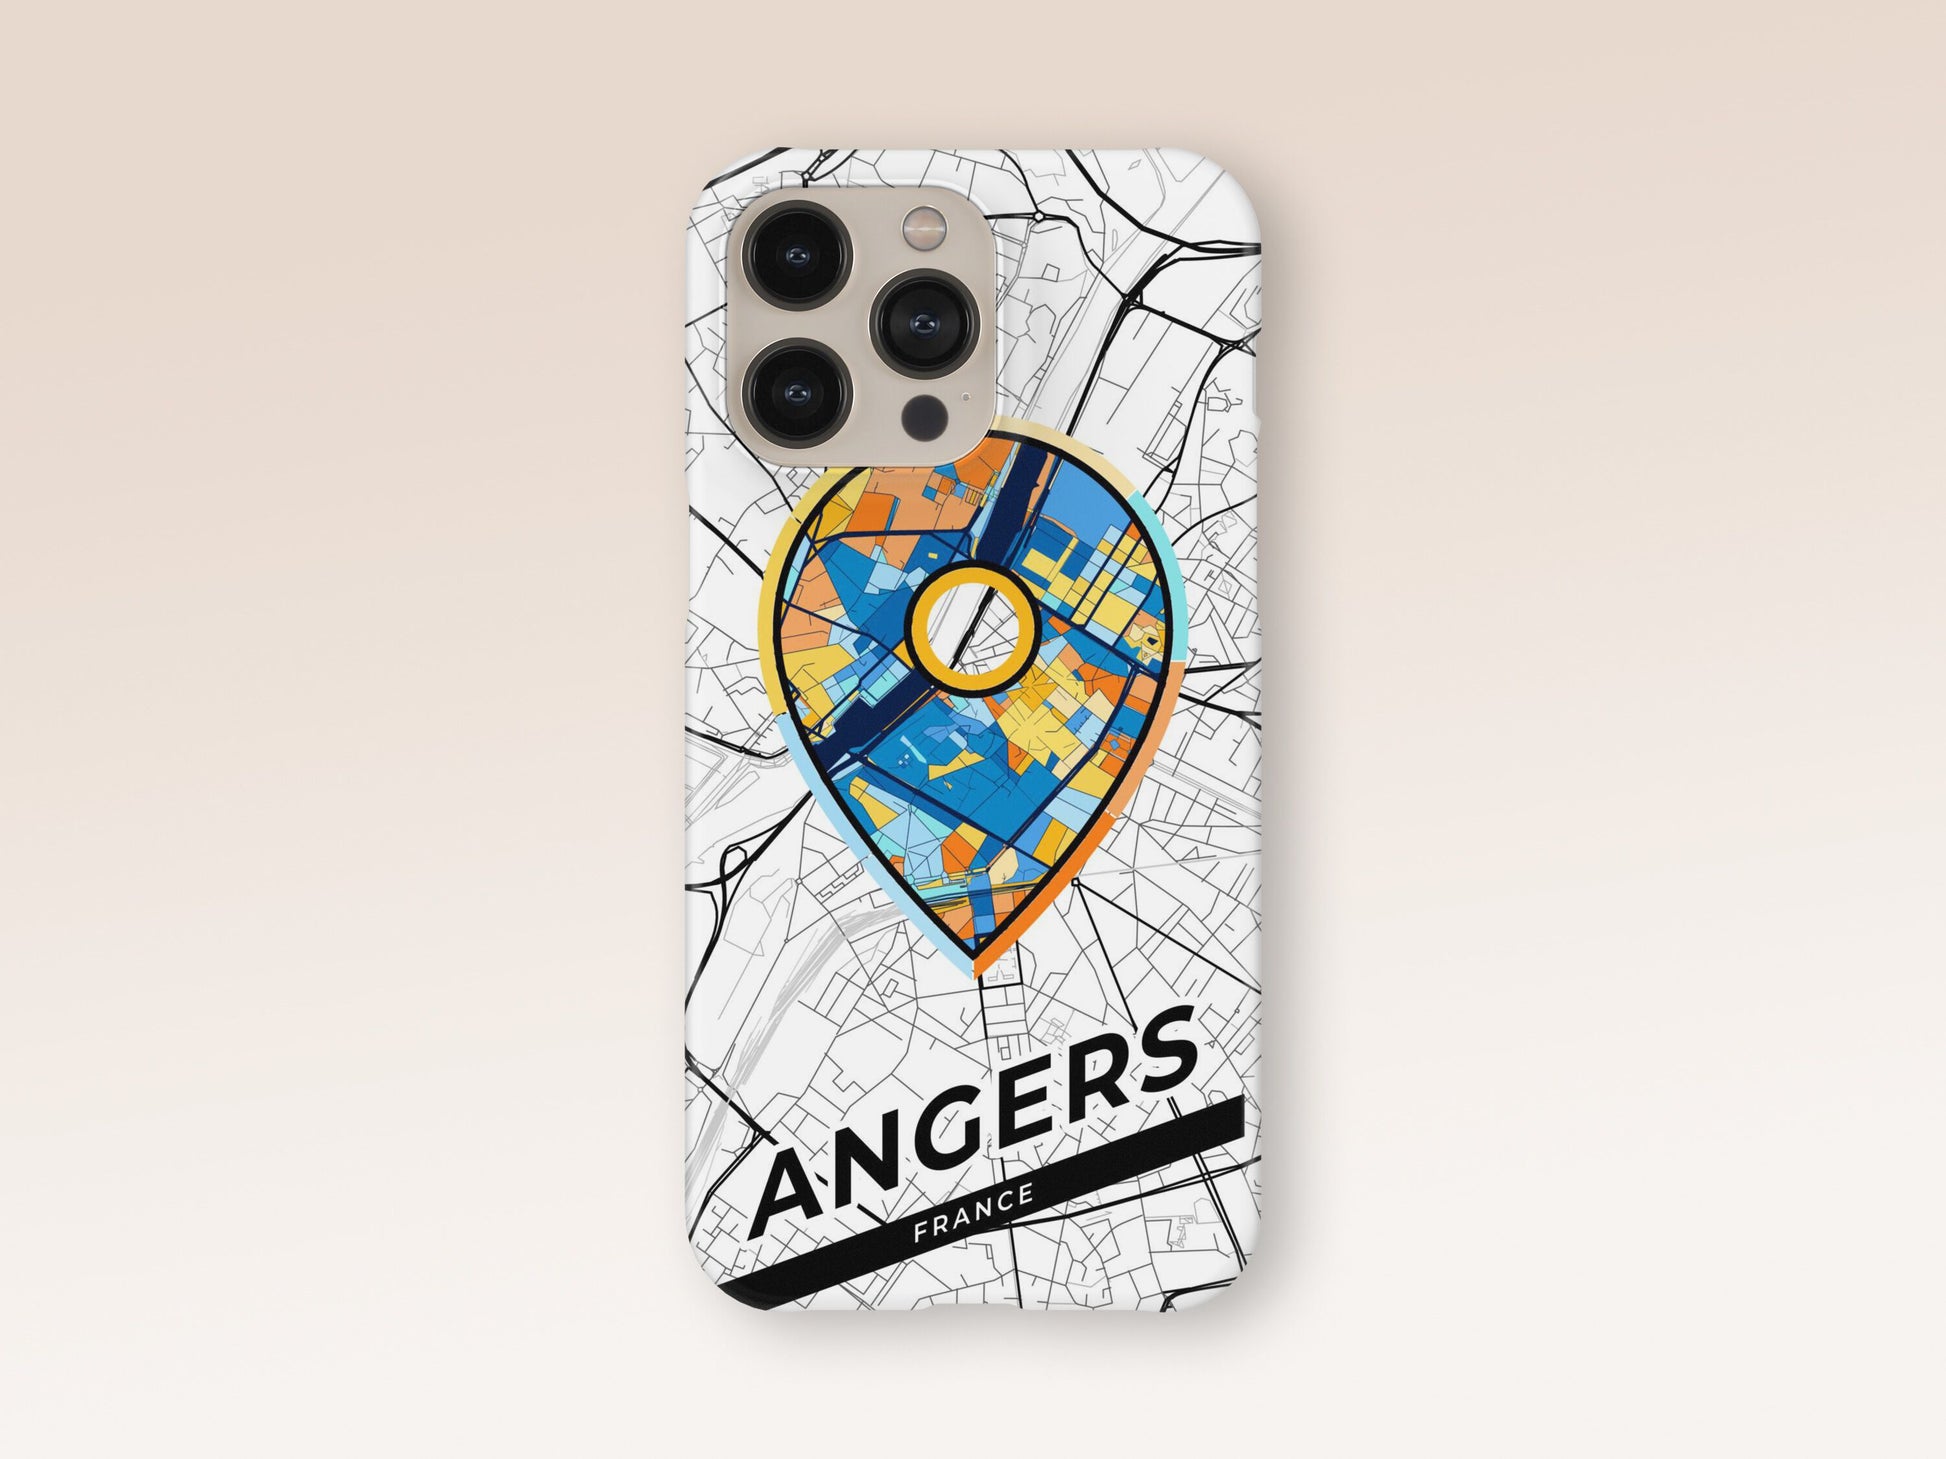 Angers France slim phone case with colorful icon. Birthday, wedding or housewarming gift. Couple match cases. 1